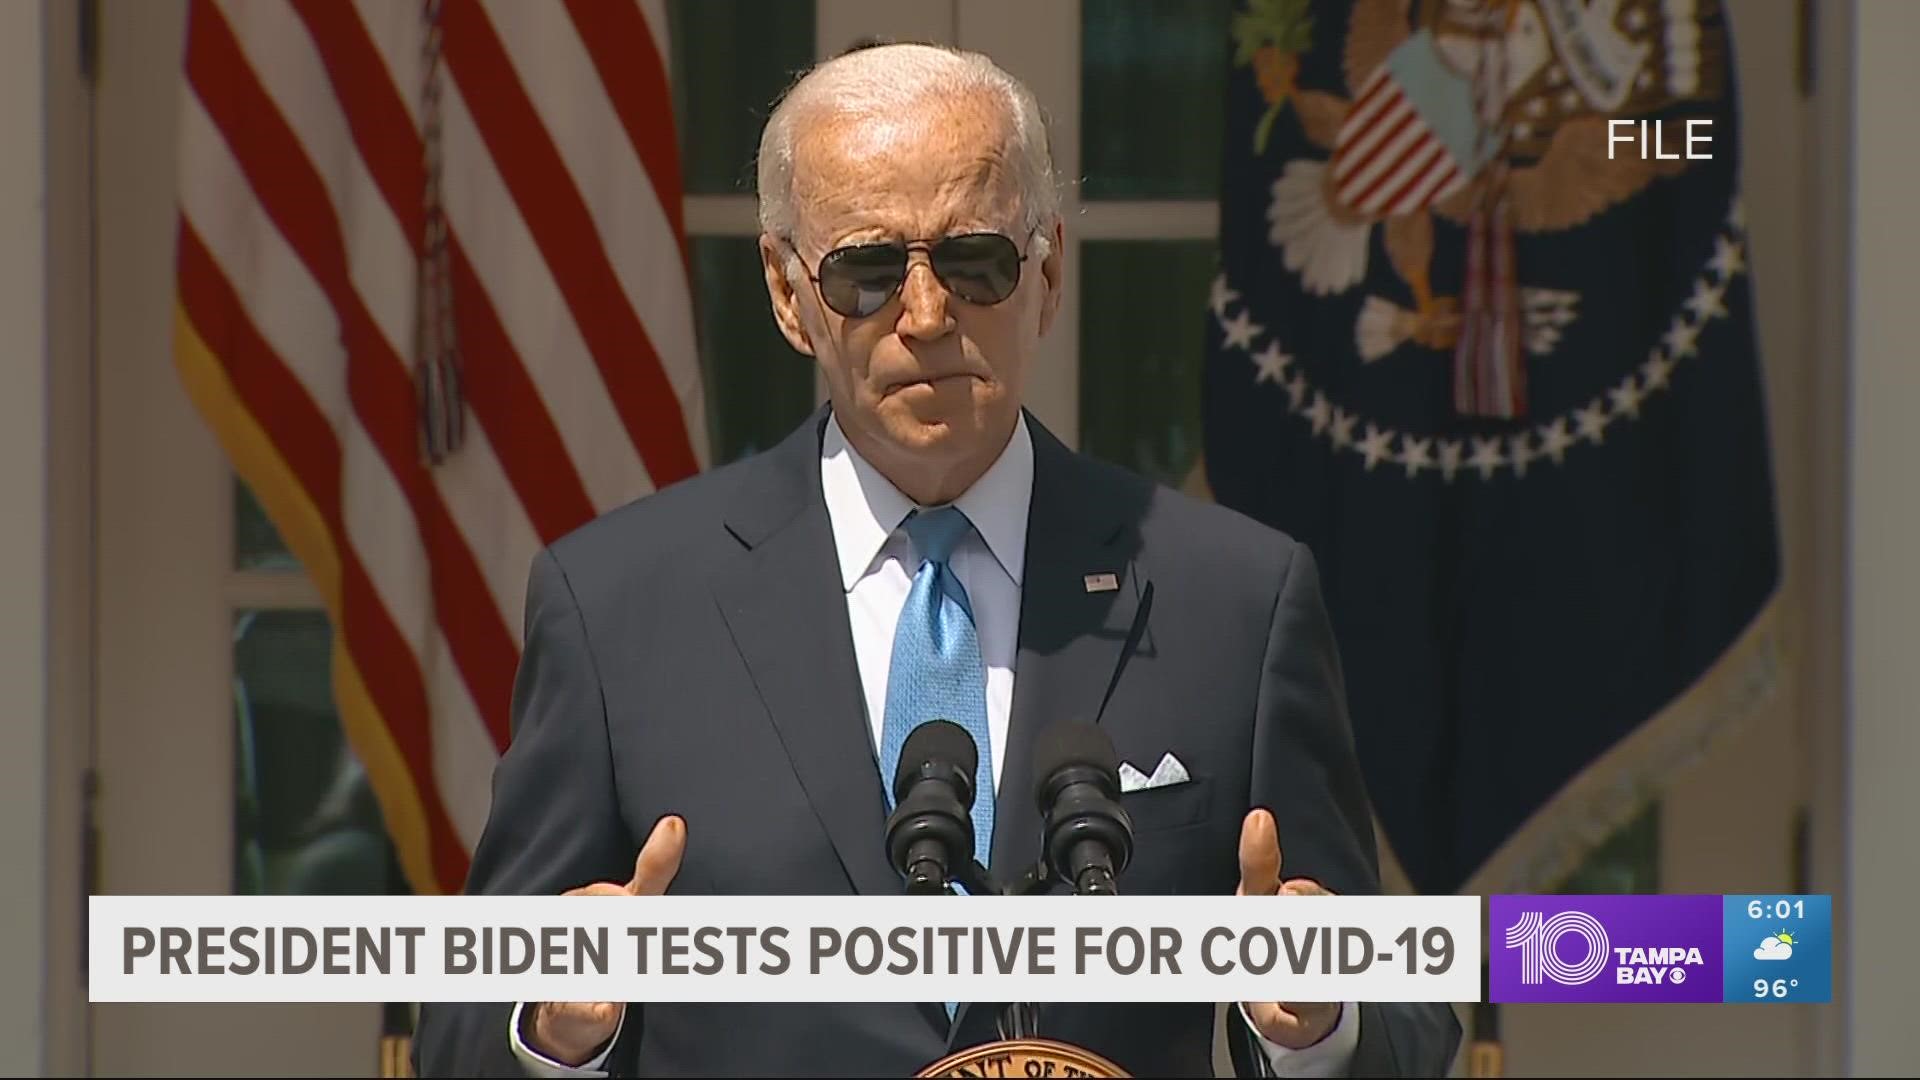 His physician said Biden is one of a small percentage of Paxlovid patients who "rebound" and test positive again.